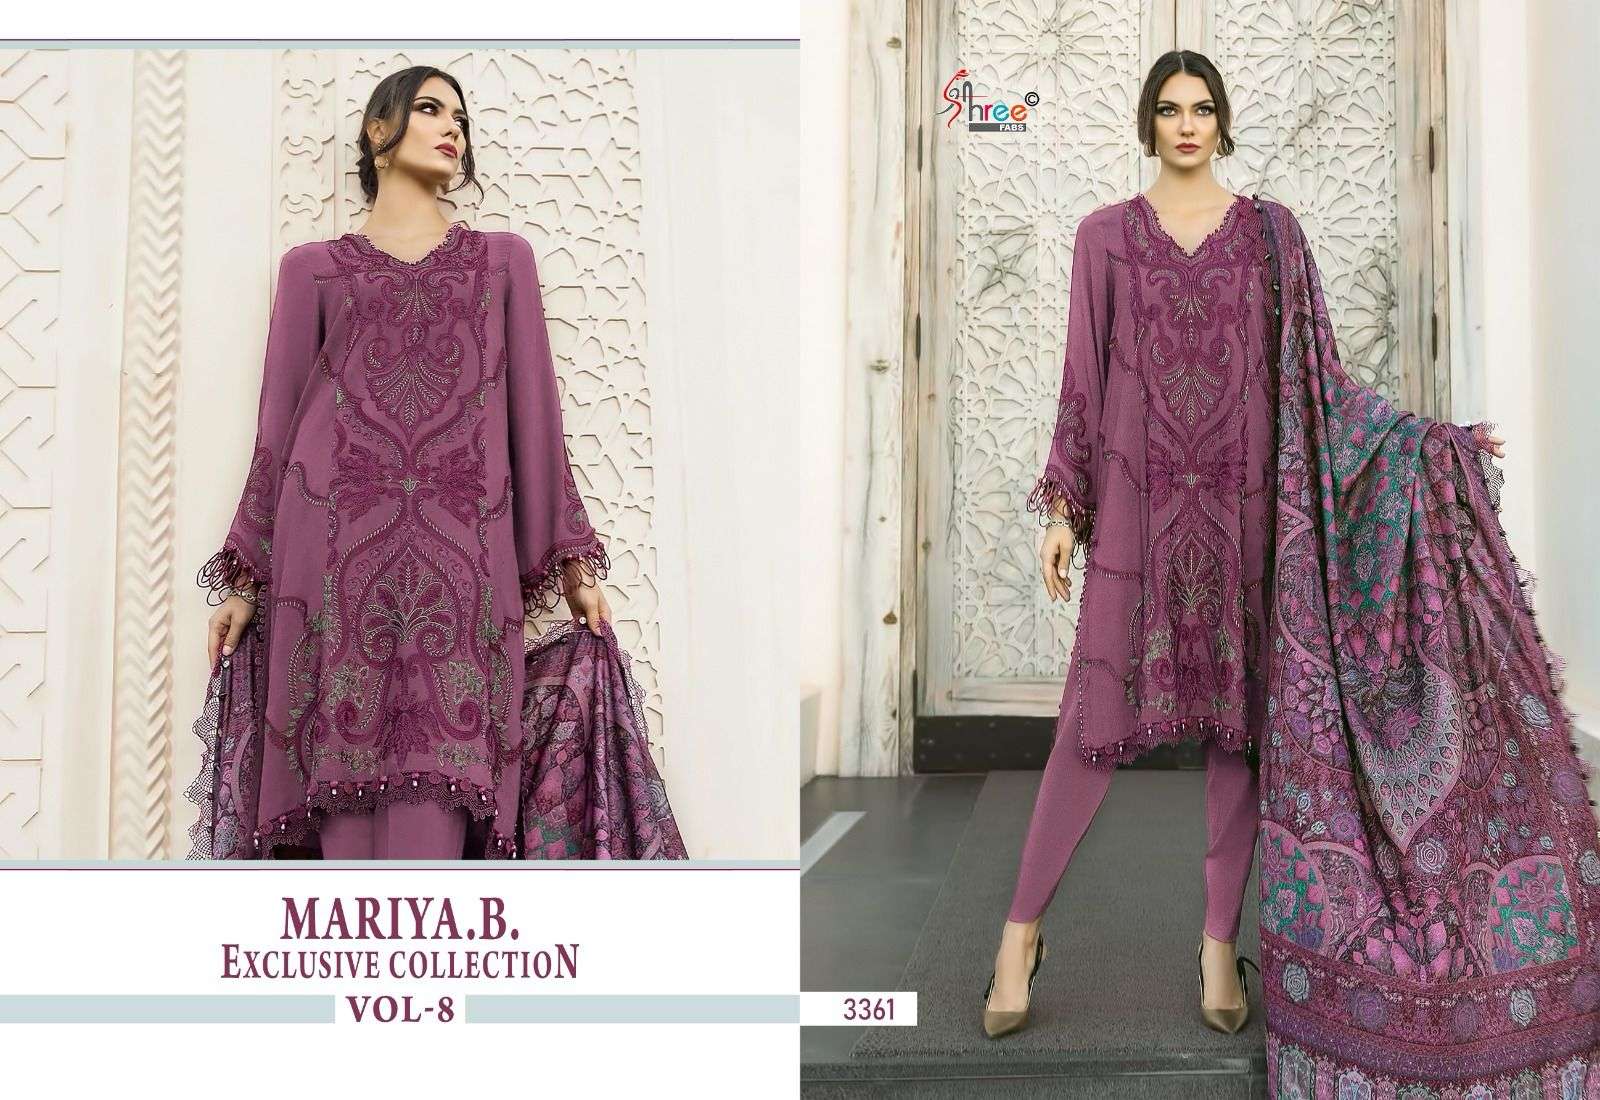 SHREE FABS MARIA B EXCLUSIVE COLLECTION VOL 8 